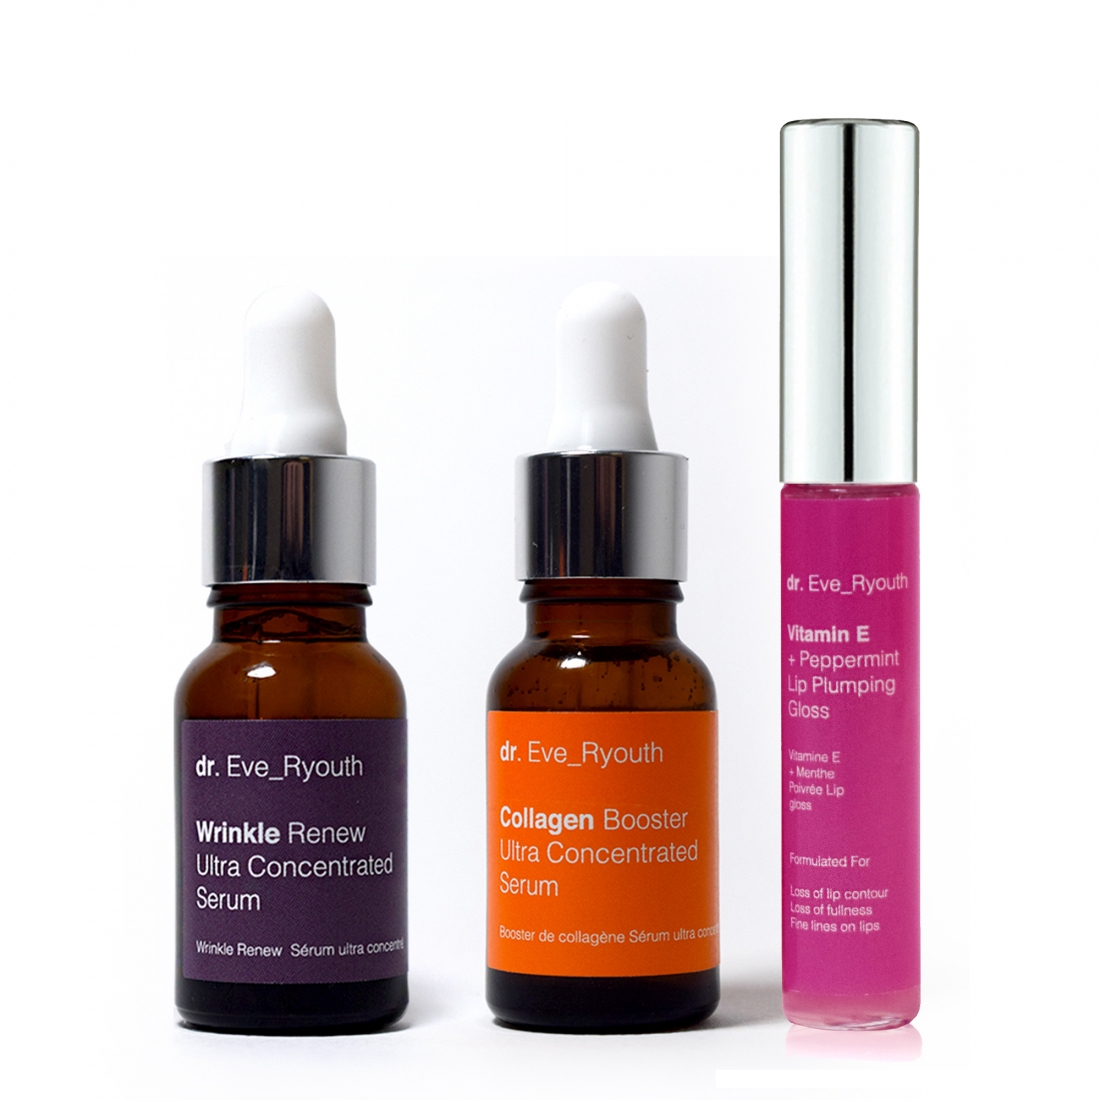 Set de soins anti-âge 'Collagen Booster + Wrinkle Renew  + Vitamin E and Peppirment' - 3 Pièces